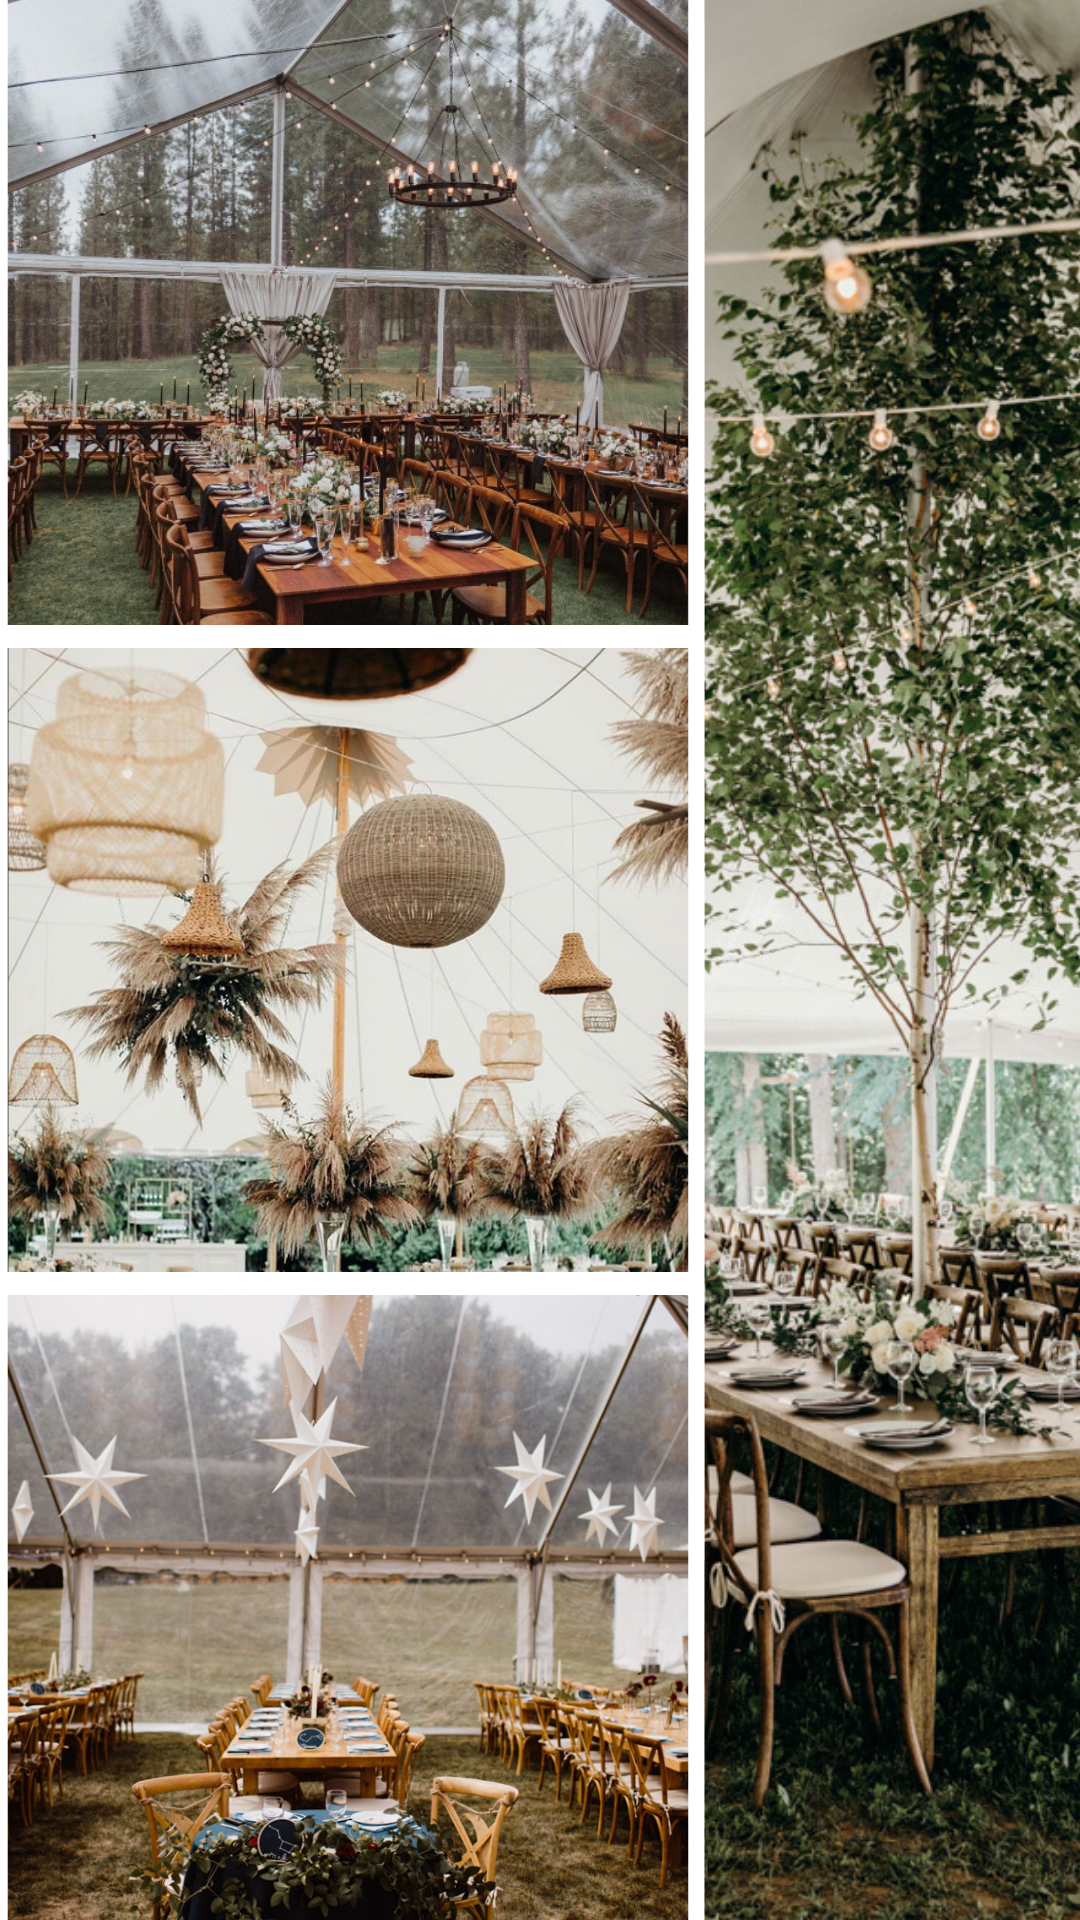 Backyard tent wedding reception in clear tent ideas and hanging lanterns